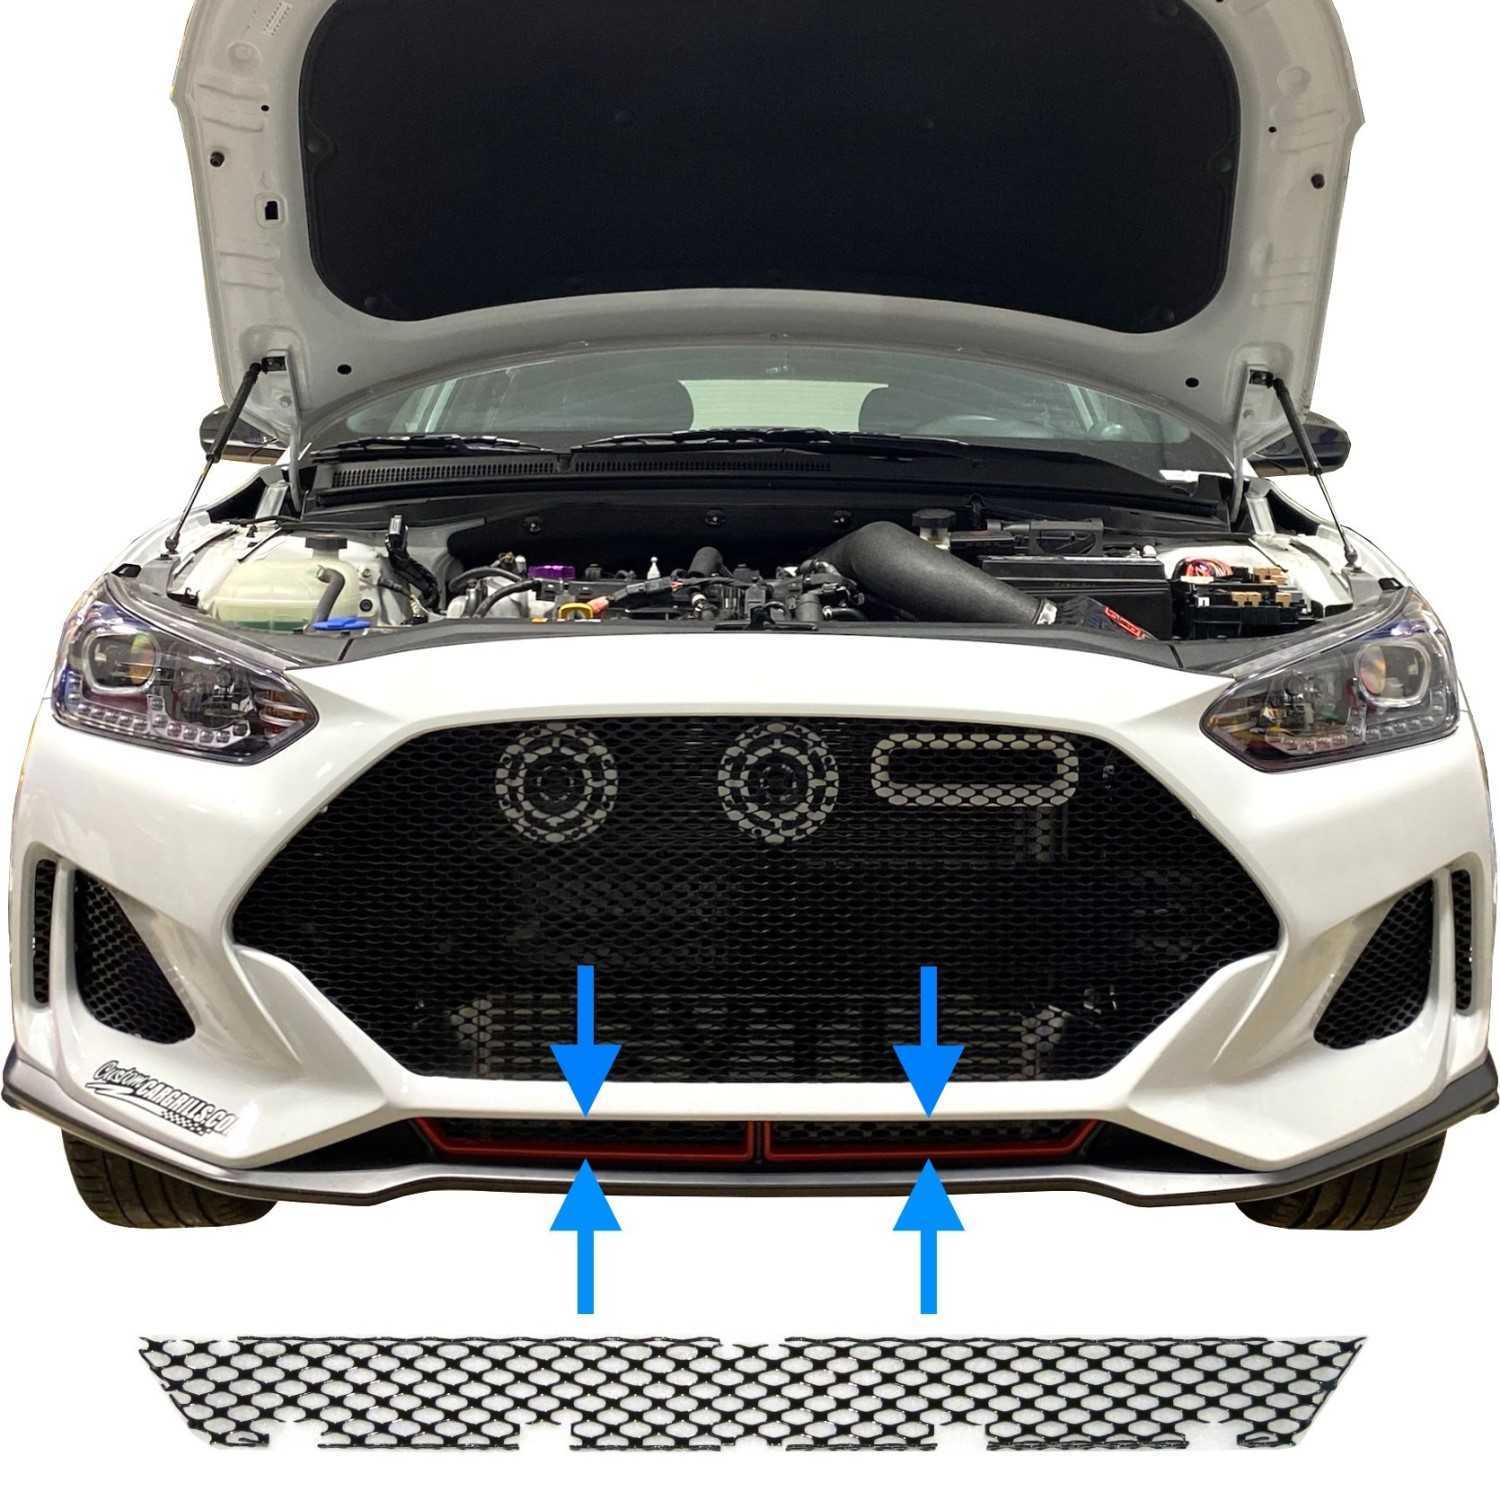 2019 - 2021 Hyundai Veloster (Non "N" Version) Lower Grill Mesh Piece